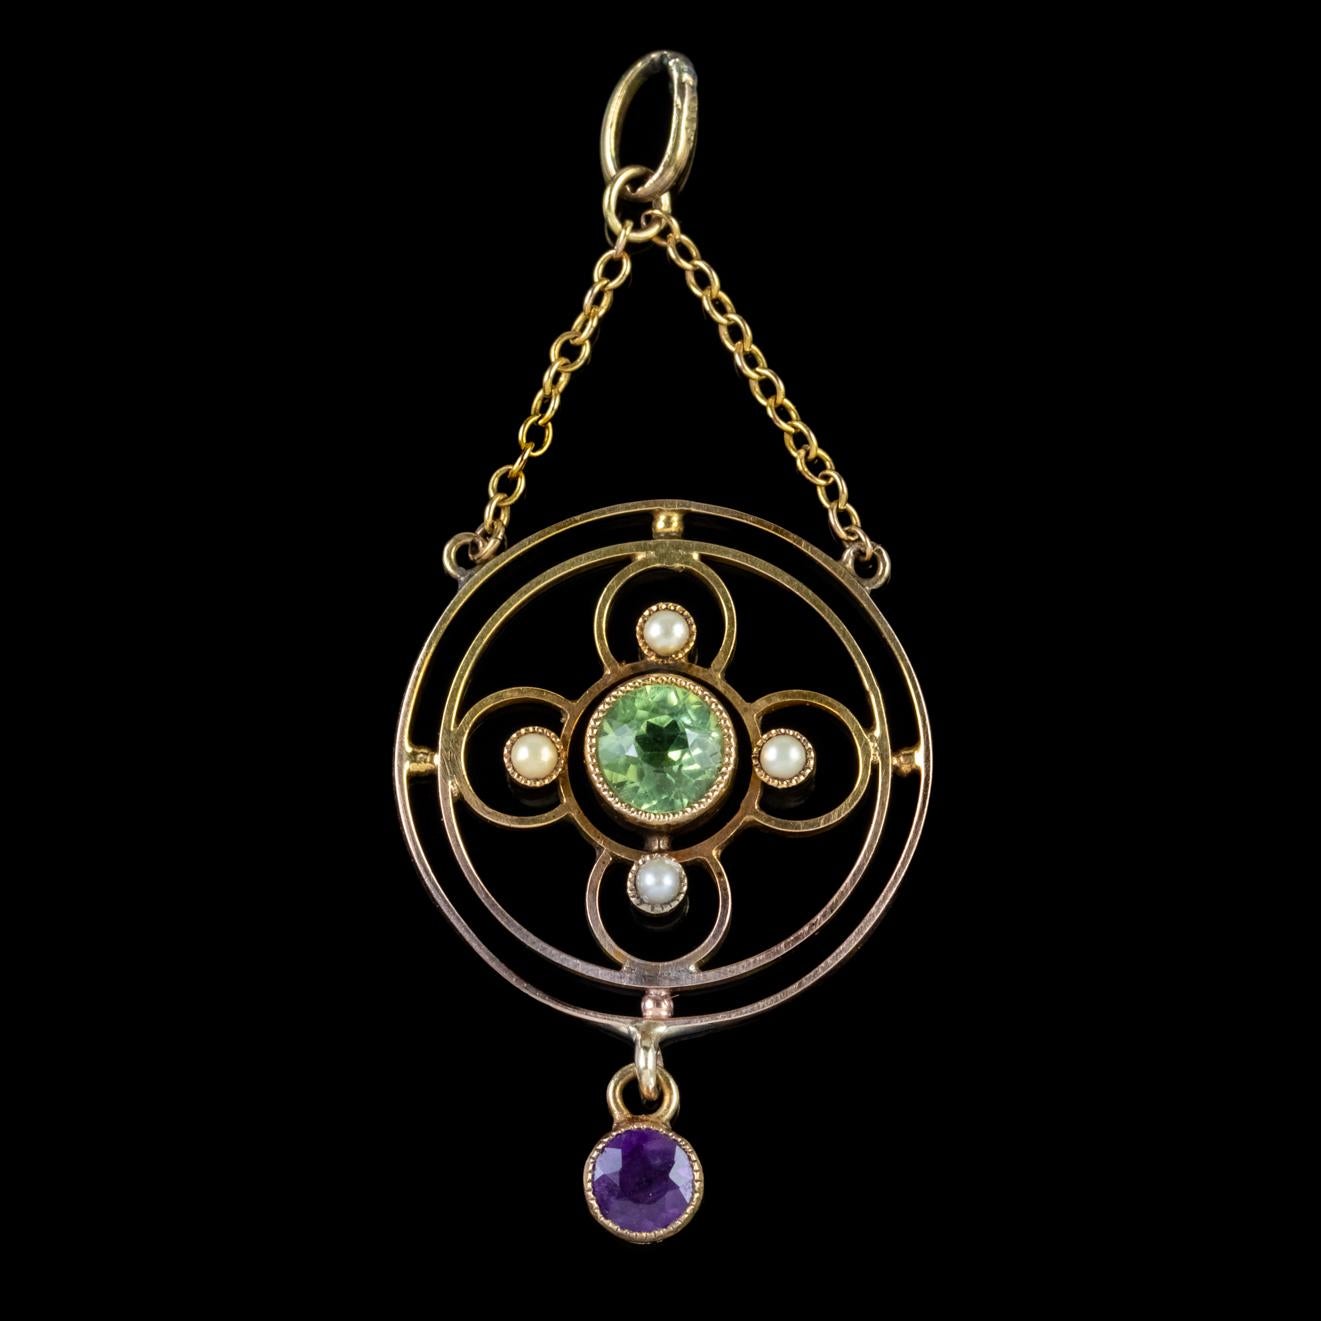 A beautiful antique Edwardian Suffragette pendant featuring a 0.45ct Peridot in the centre haloed by four Pearls with a fabulous 0.20ct Amethyst dropper dangling below. 

Suffragette jewellery was worn to show one’s allegiance to the women’s